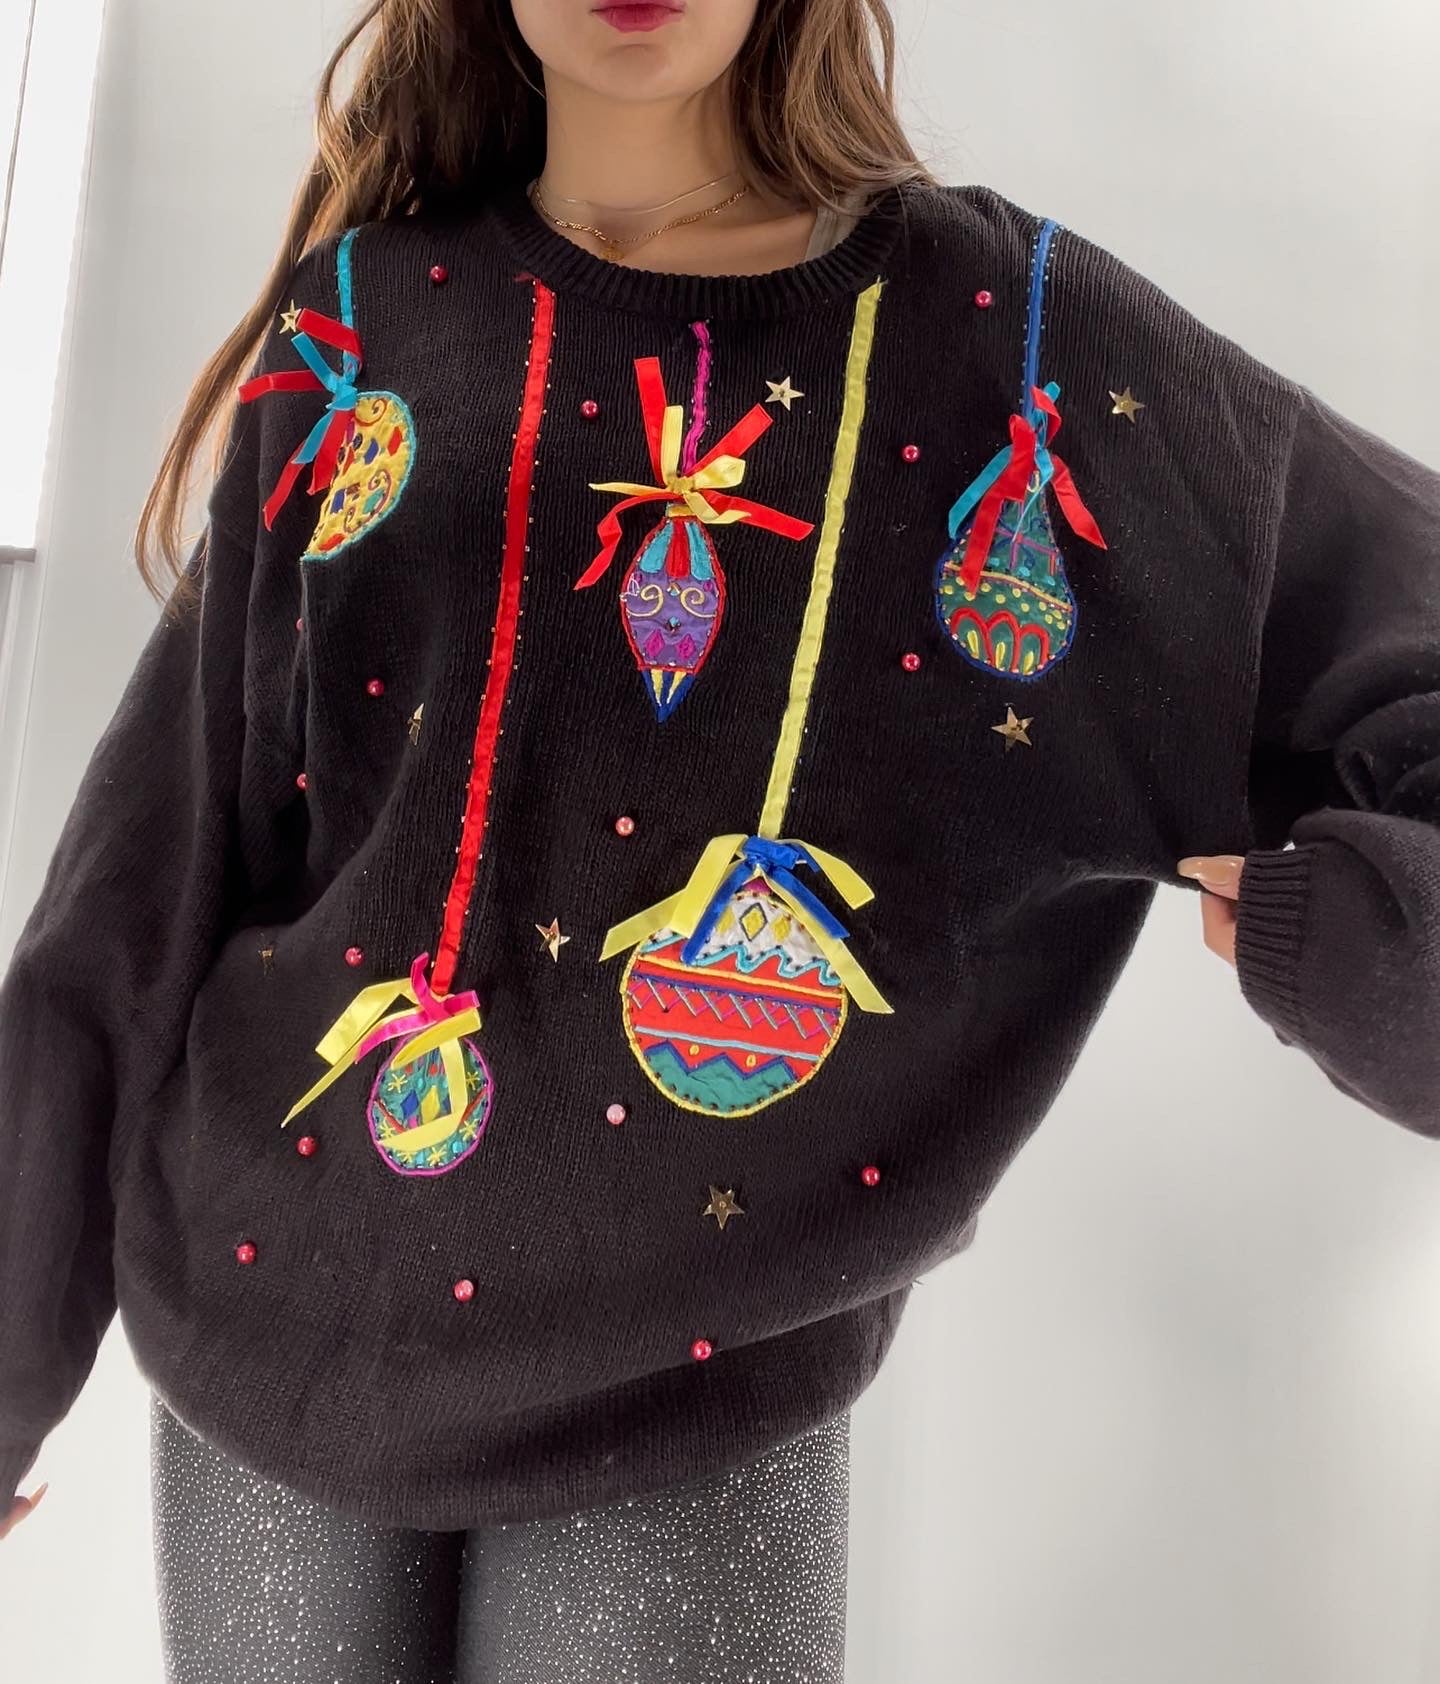 Urban Outfitters Ornament Embellished Sweater (Large)